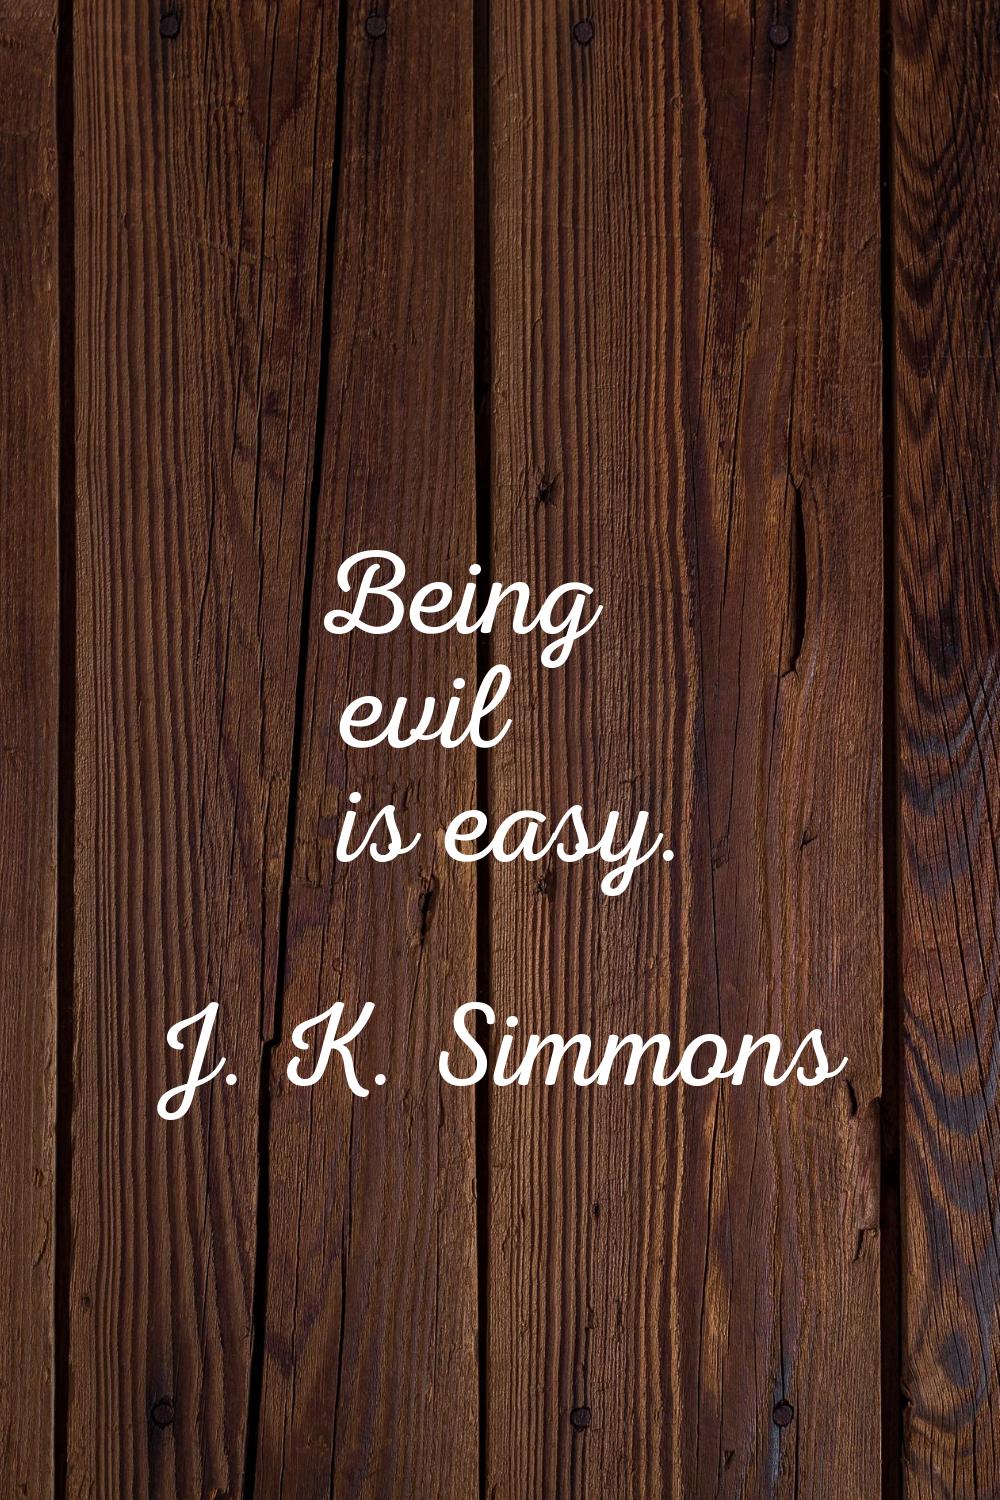 Being evil is easy.